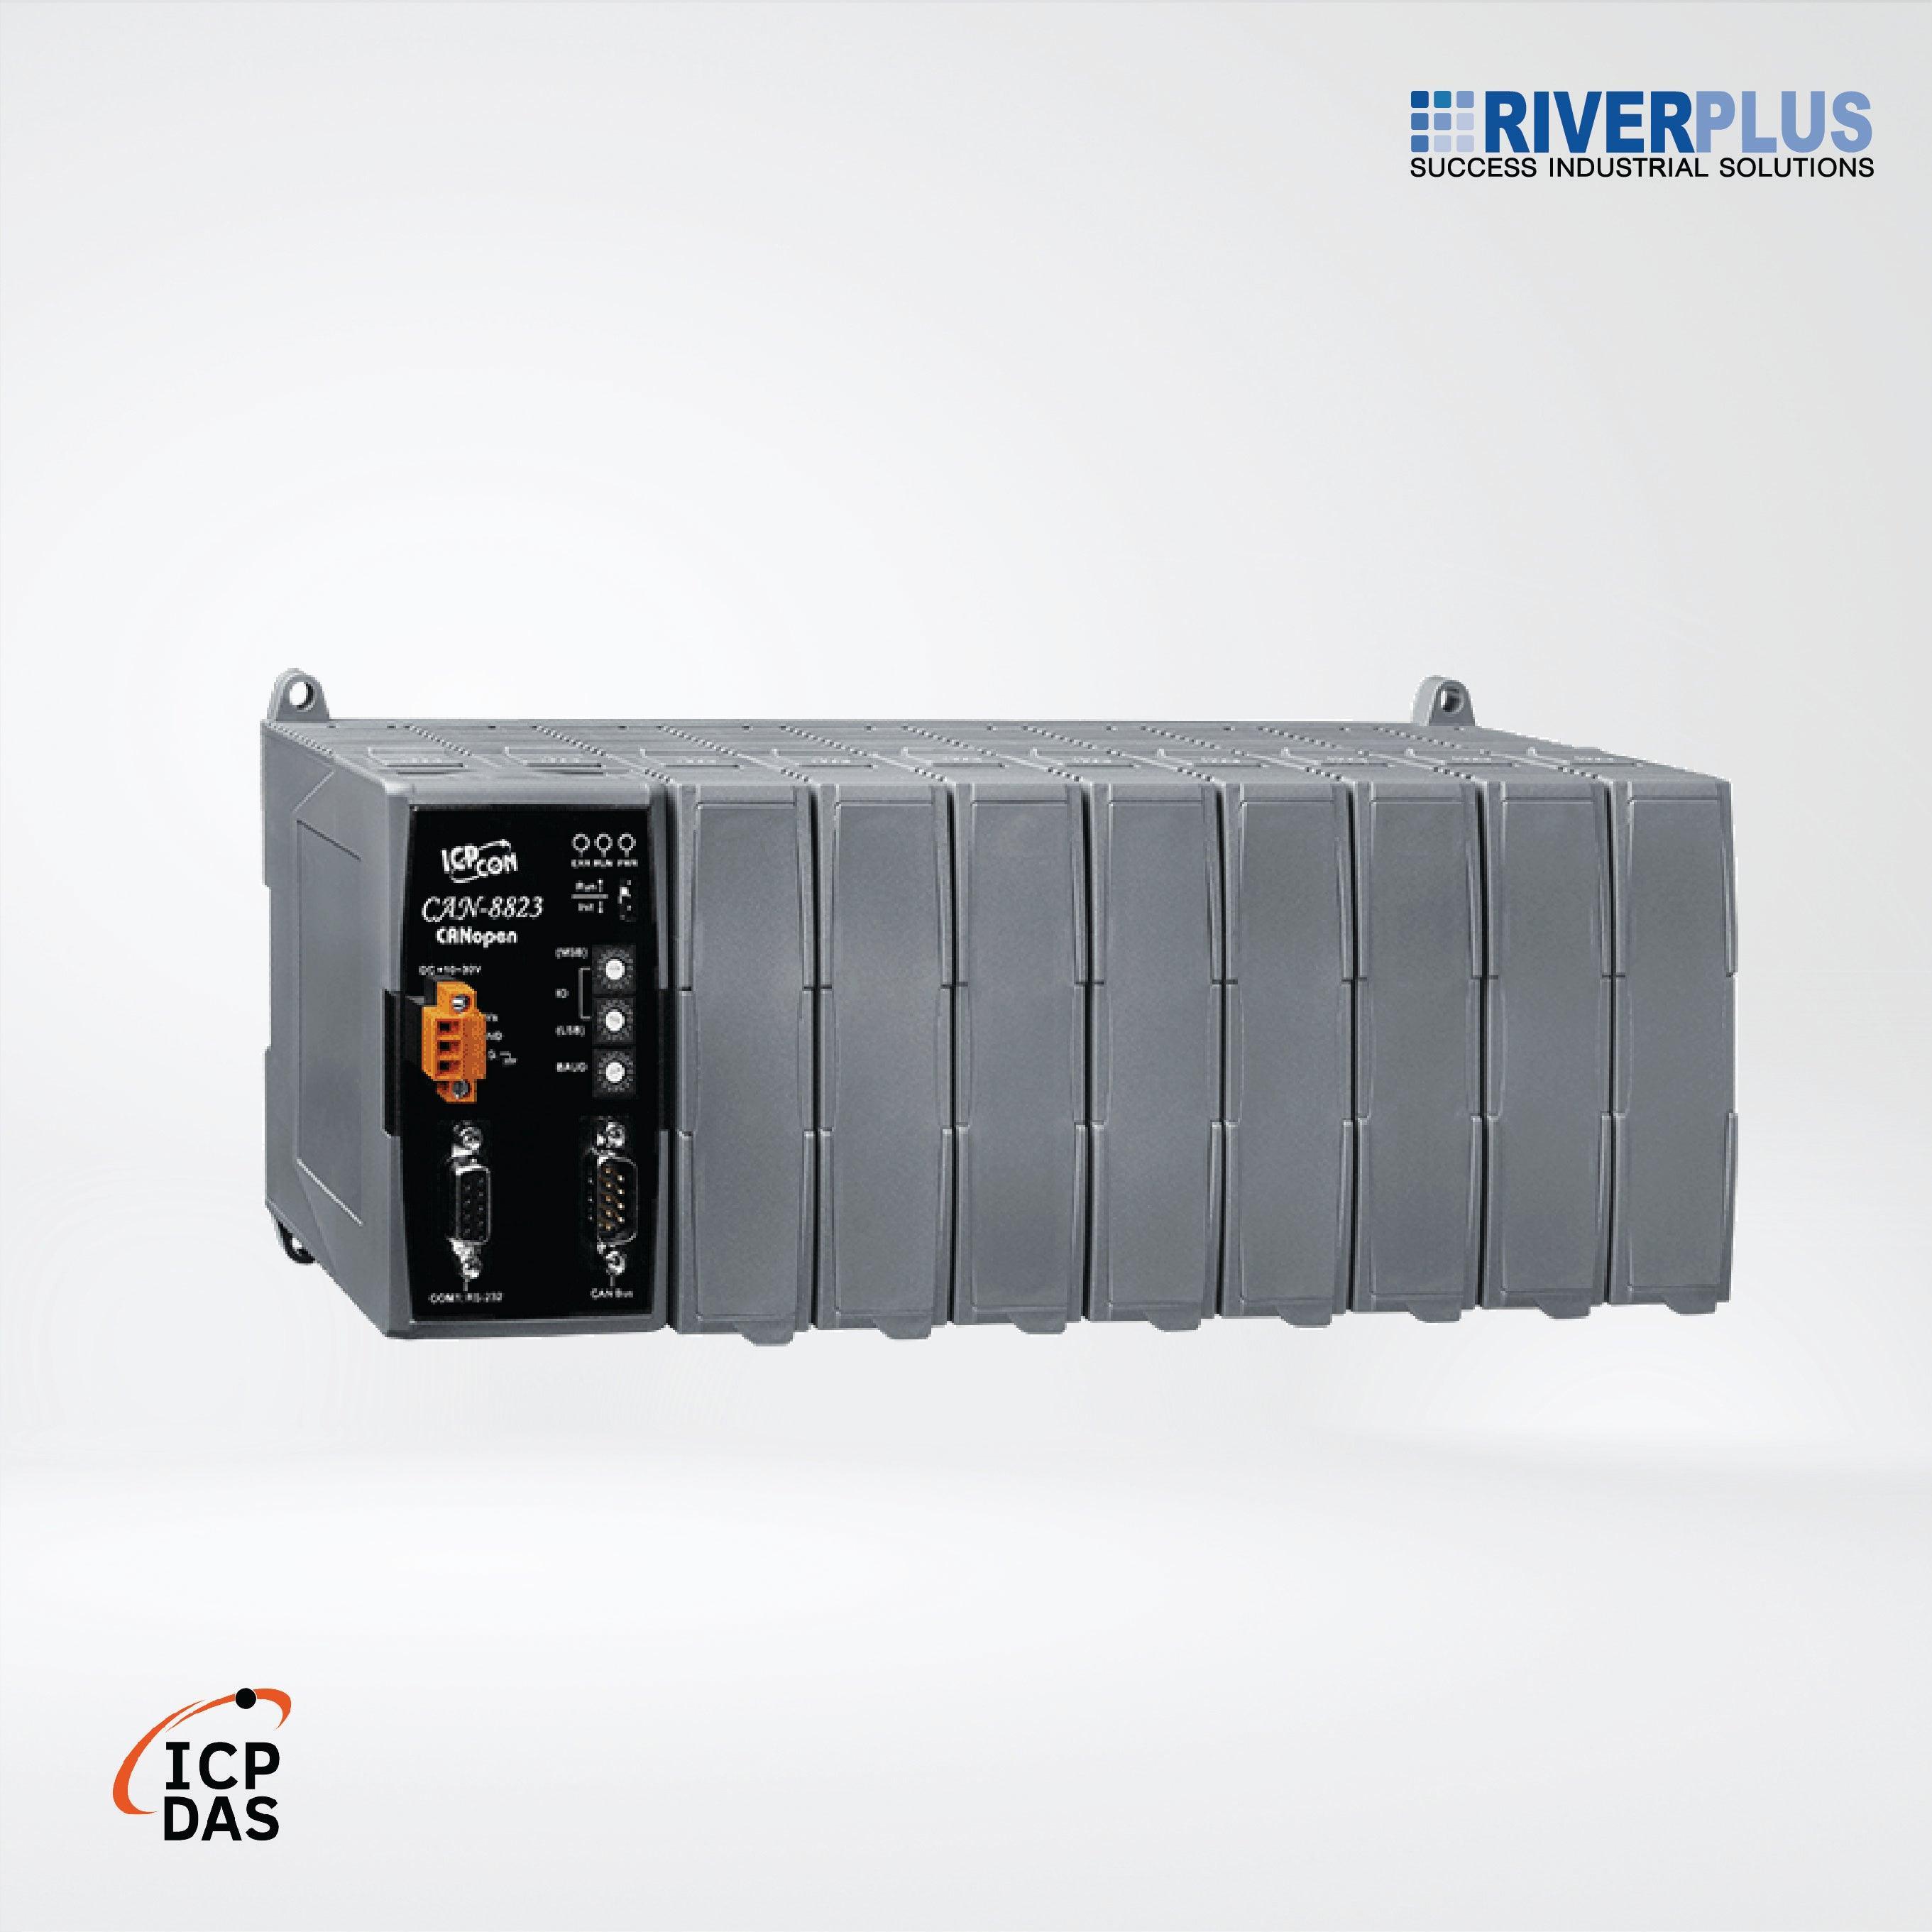 CAN-8823-G CANopen Remote I/O Unit with 8 I/O Slots - Riverplus